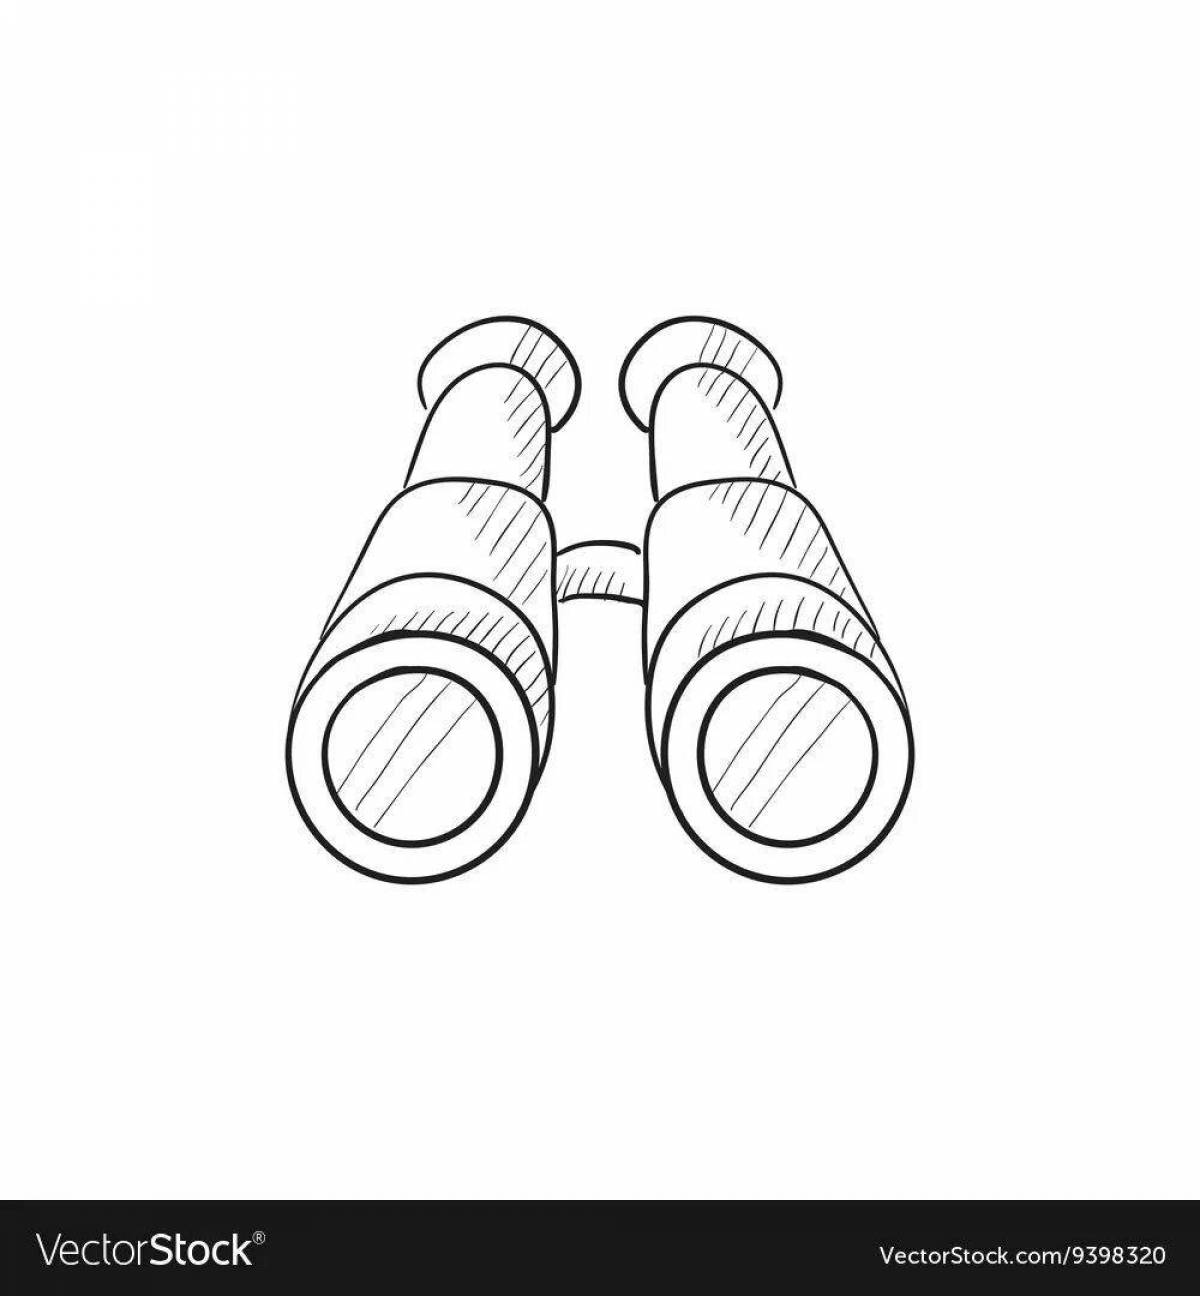 Binoculars coloring pages for kids